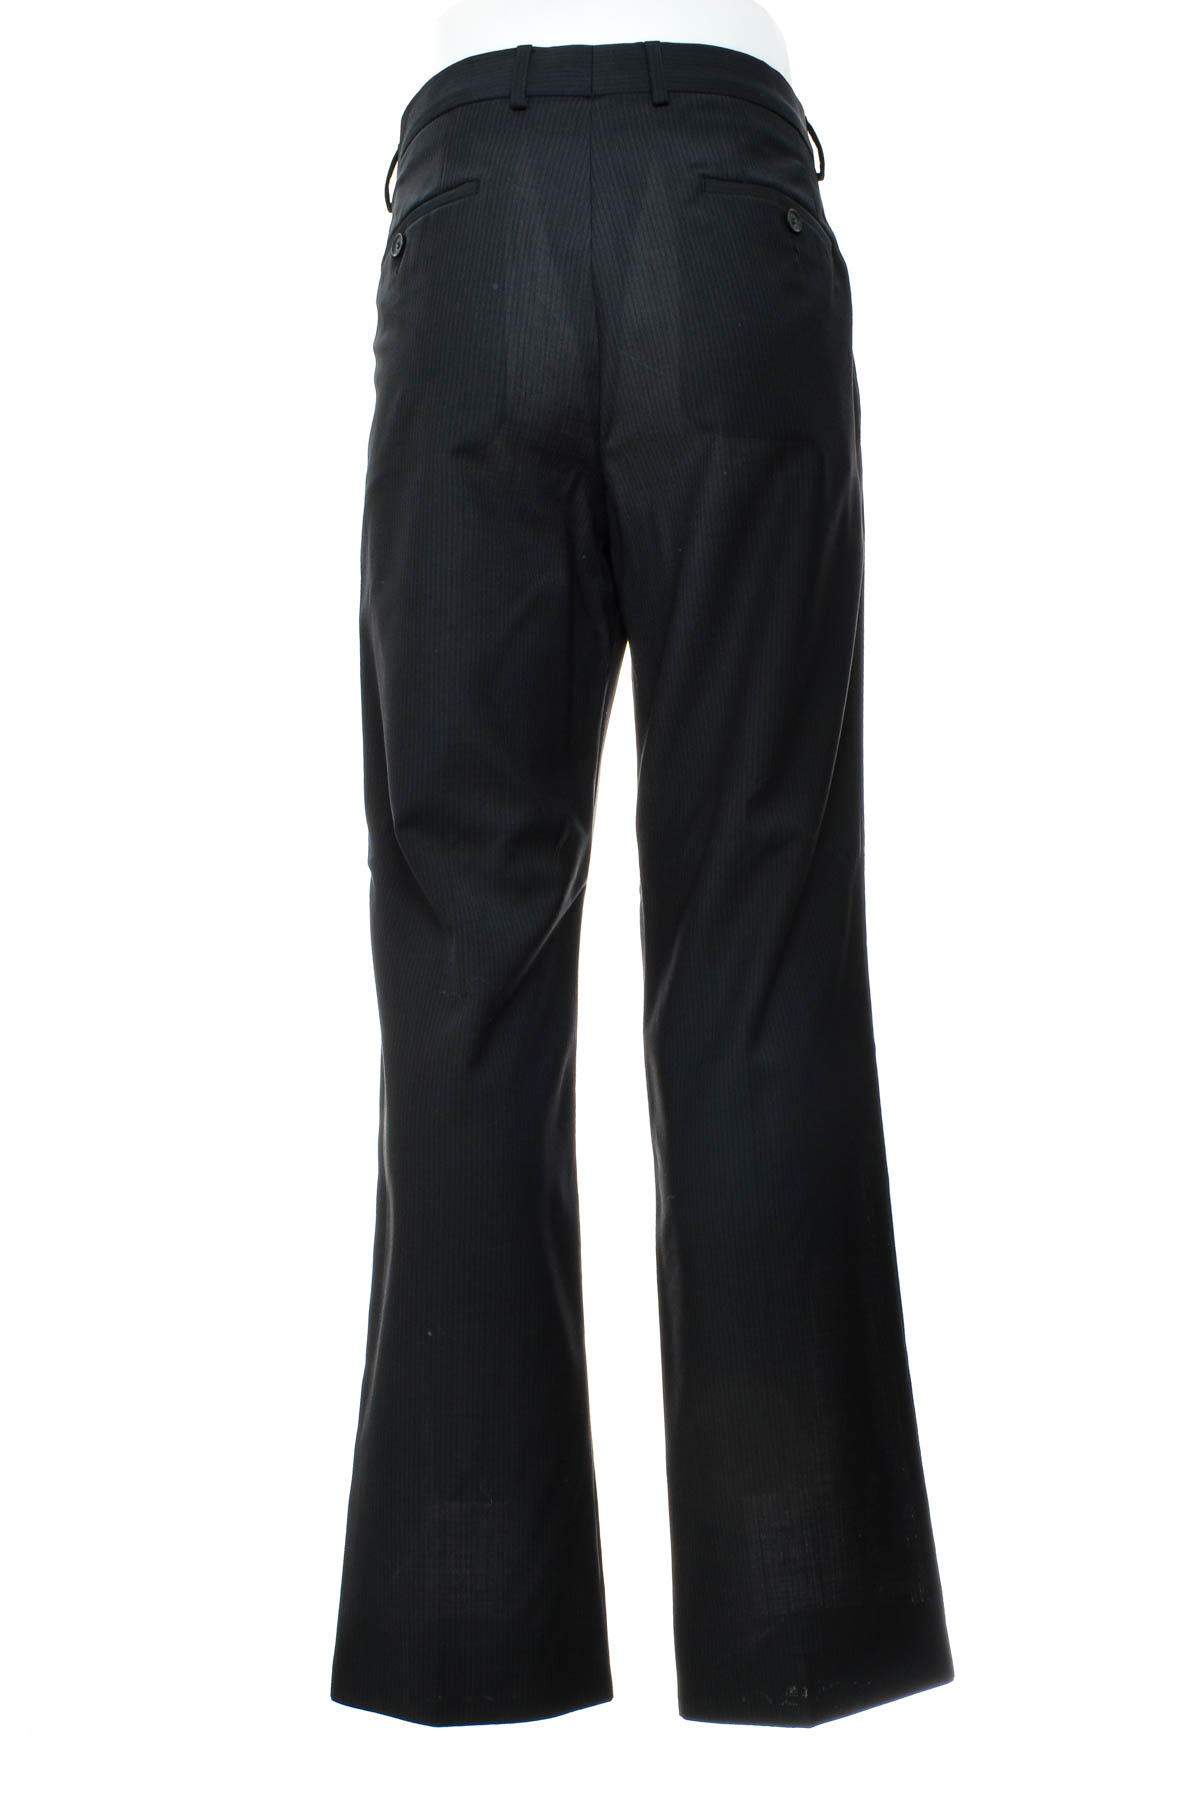 Men's trousers - SELECTION by S.Oliver - 1